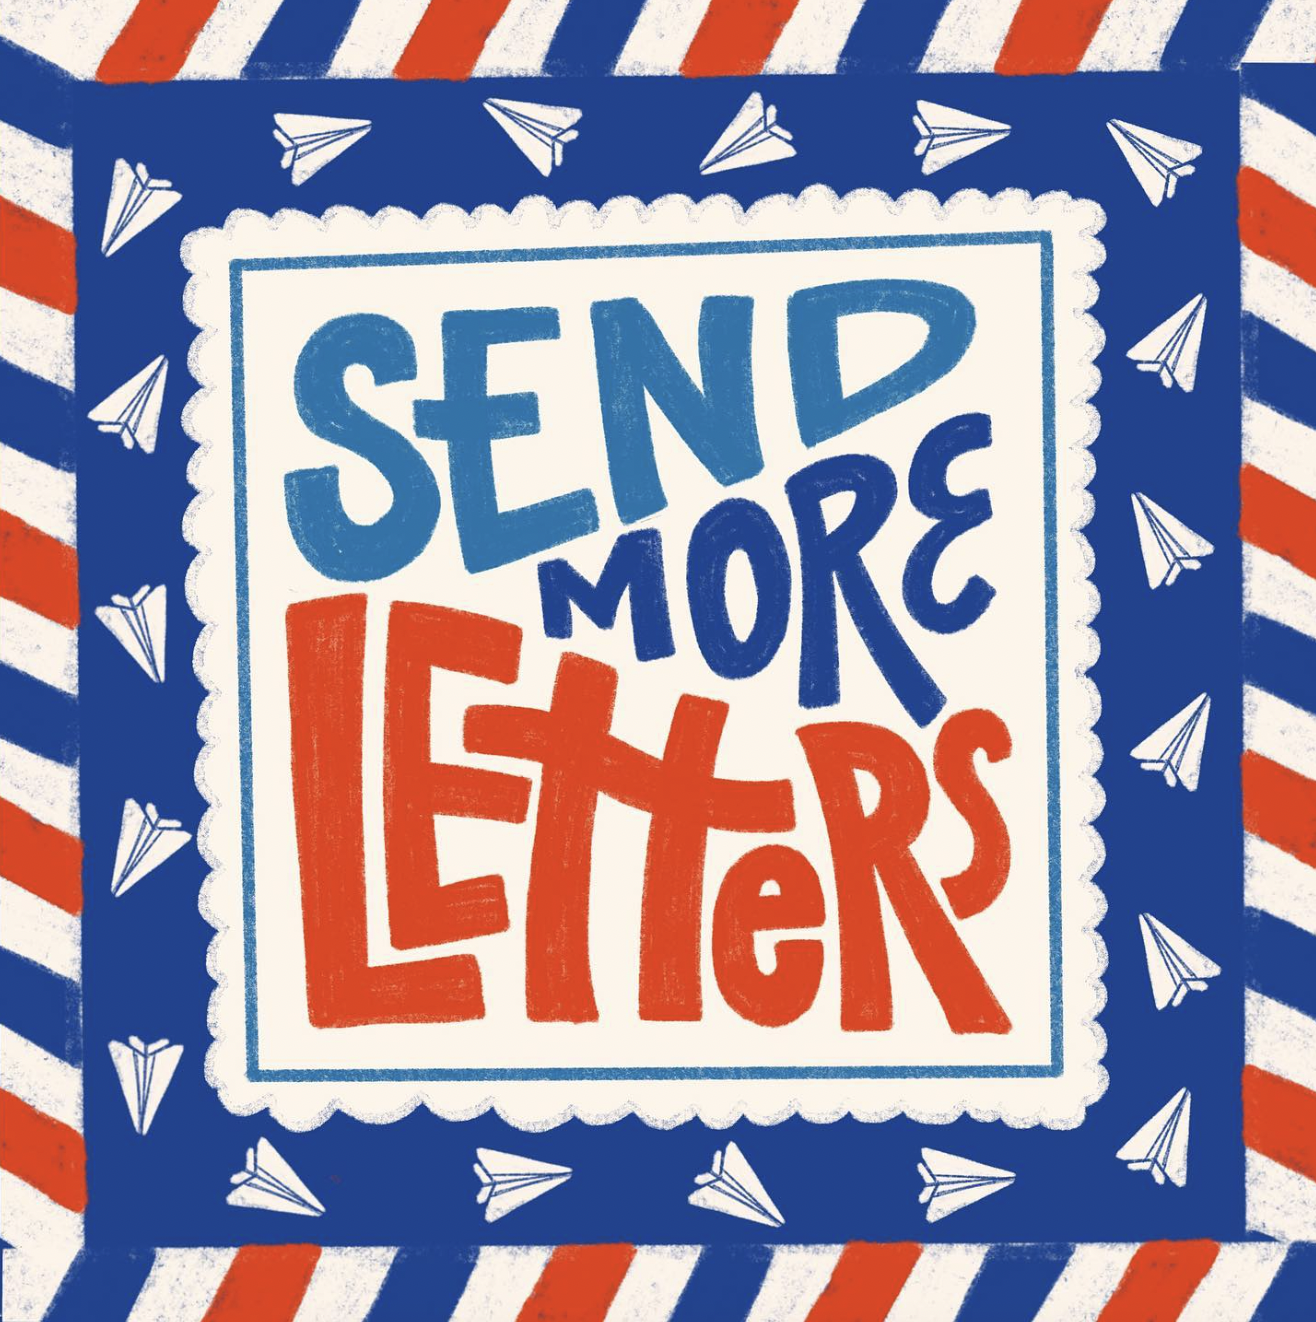 send more letters